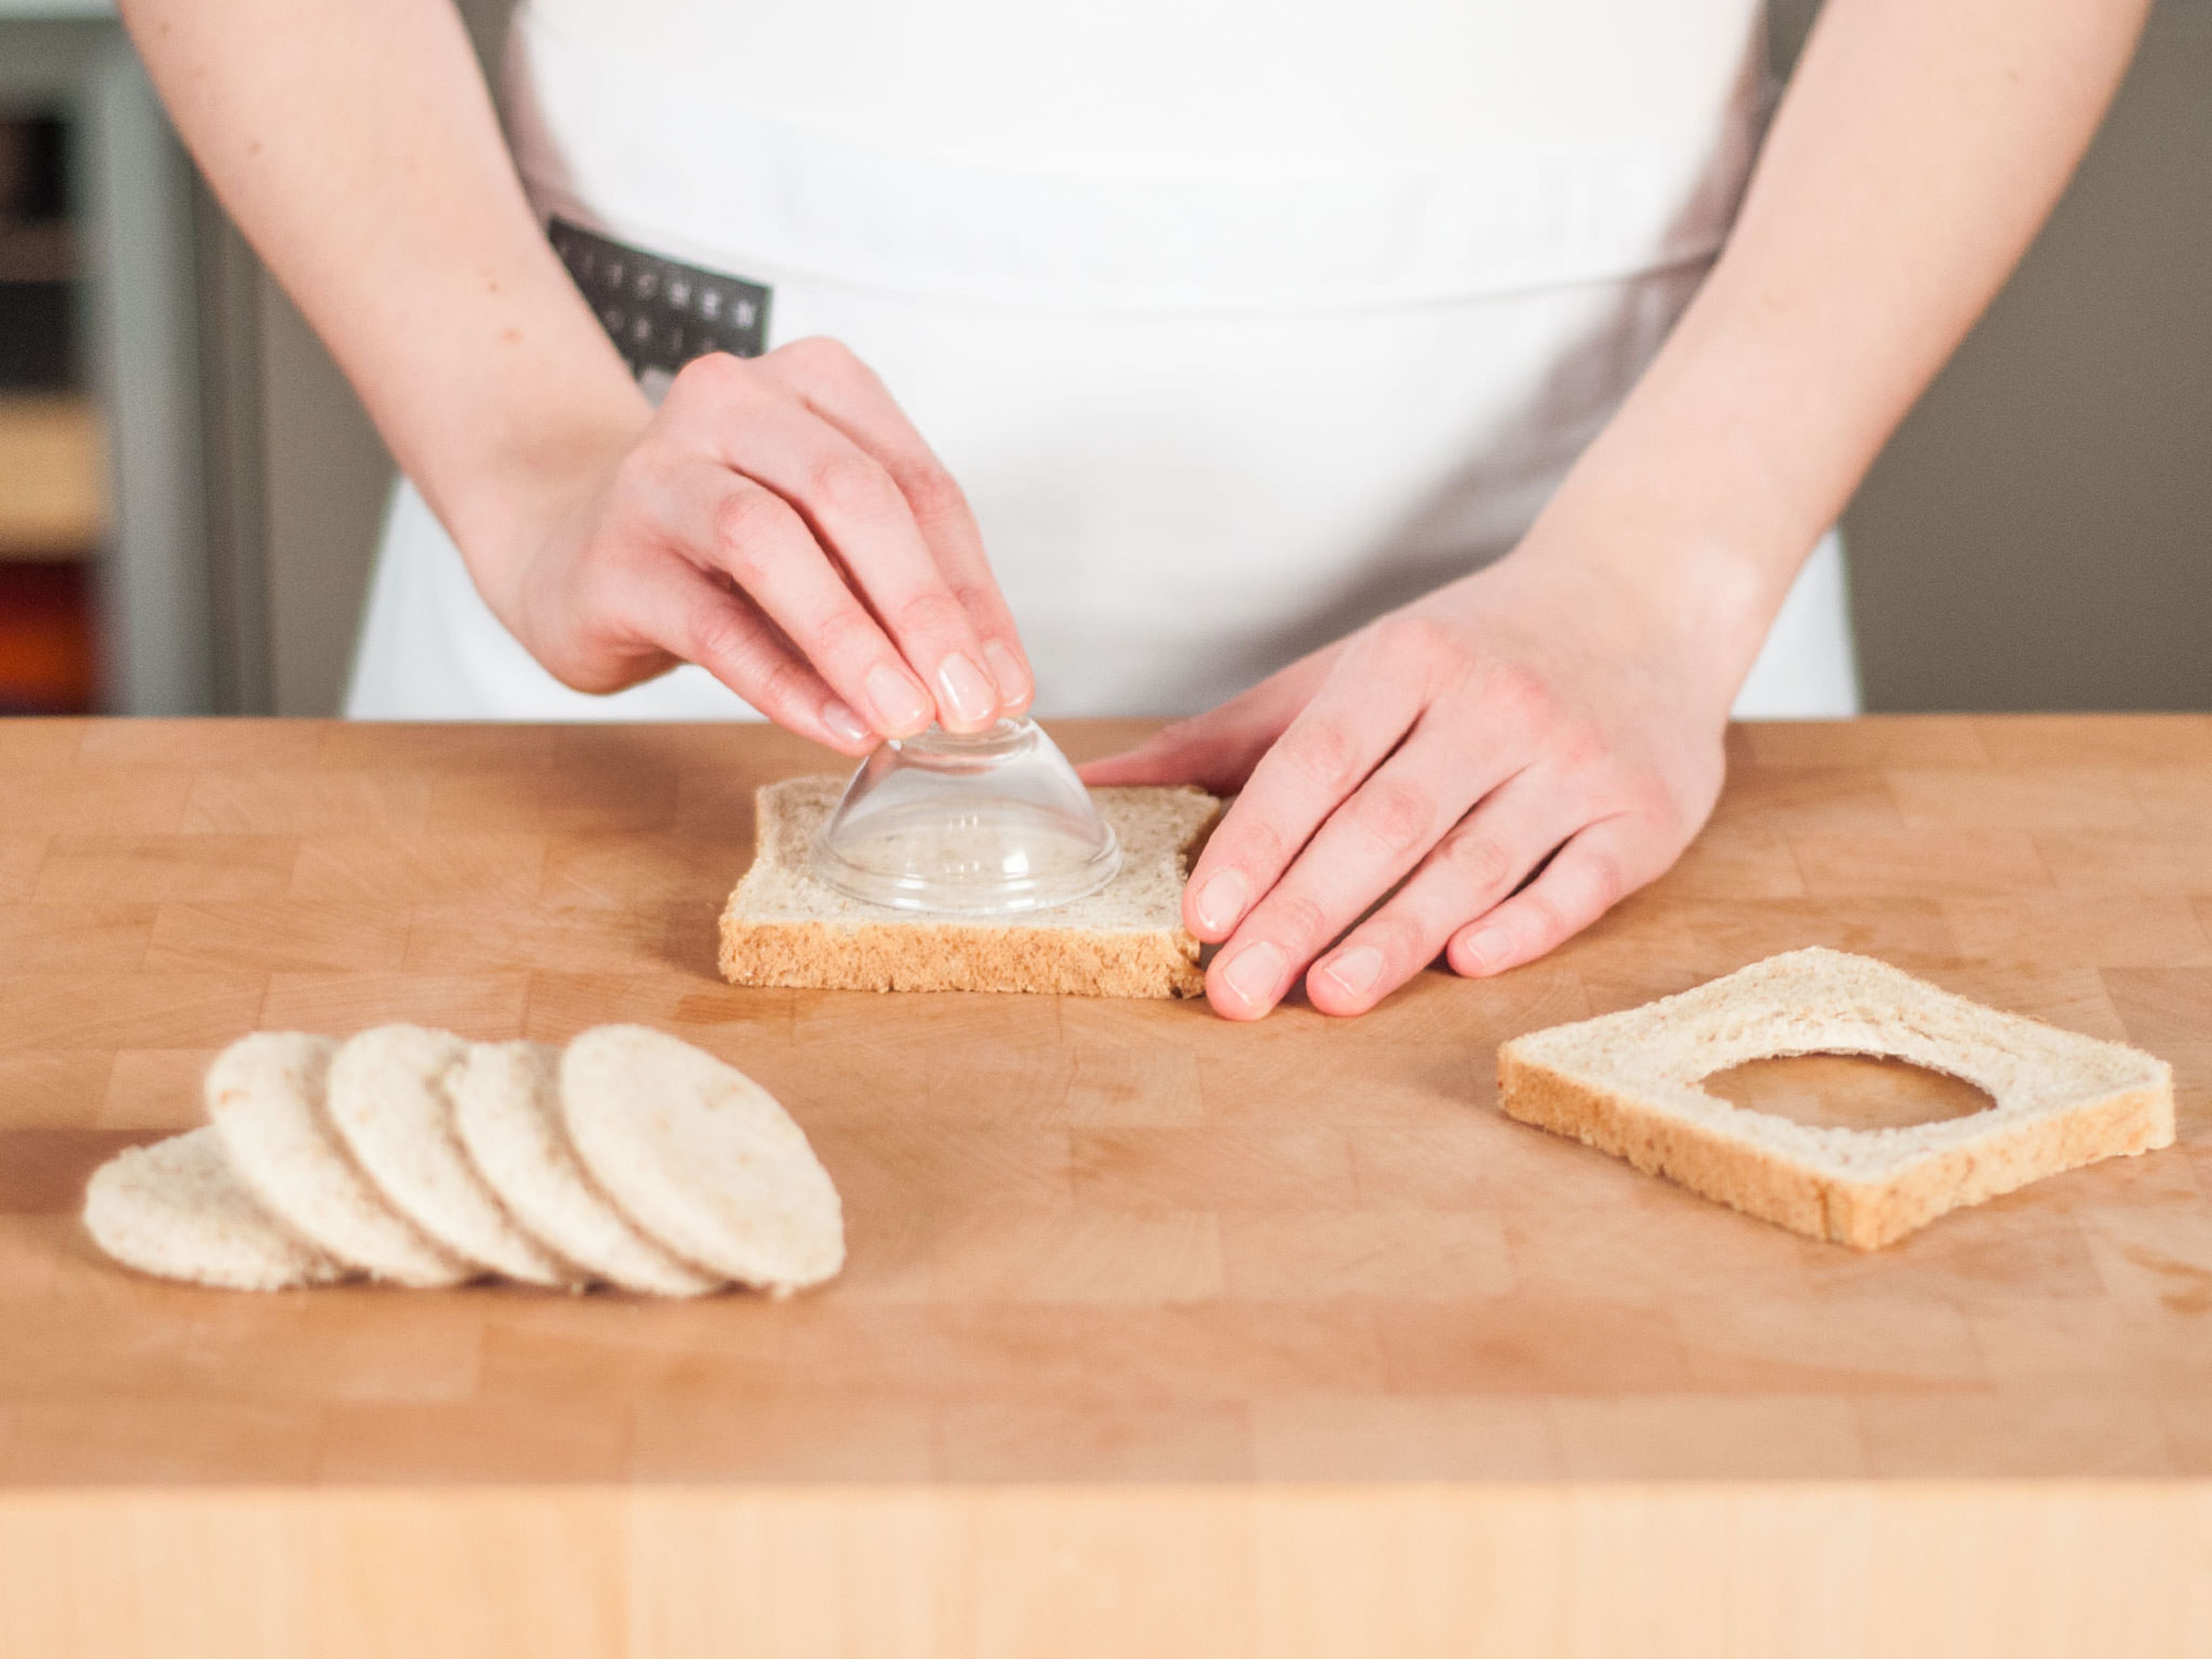 Using a small, circular bowl, cut rounds from each slice of bread.